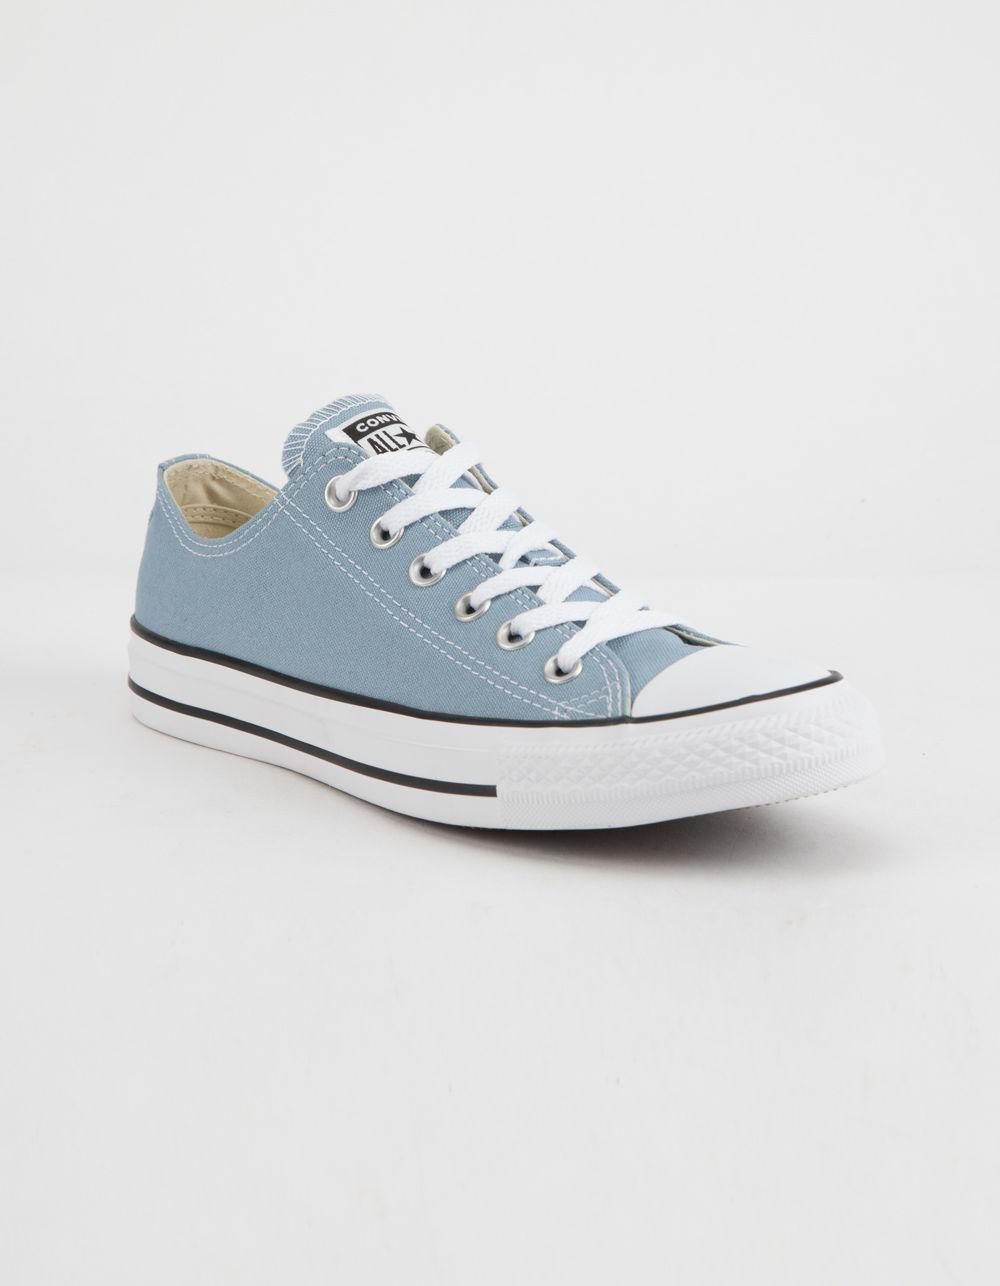 Converse Chuck Taylor All Star Washed Denim Low Top Womens Shoes in ...